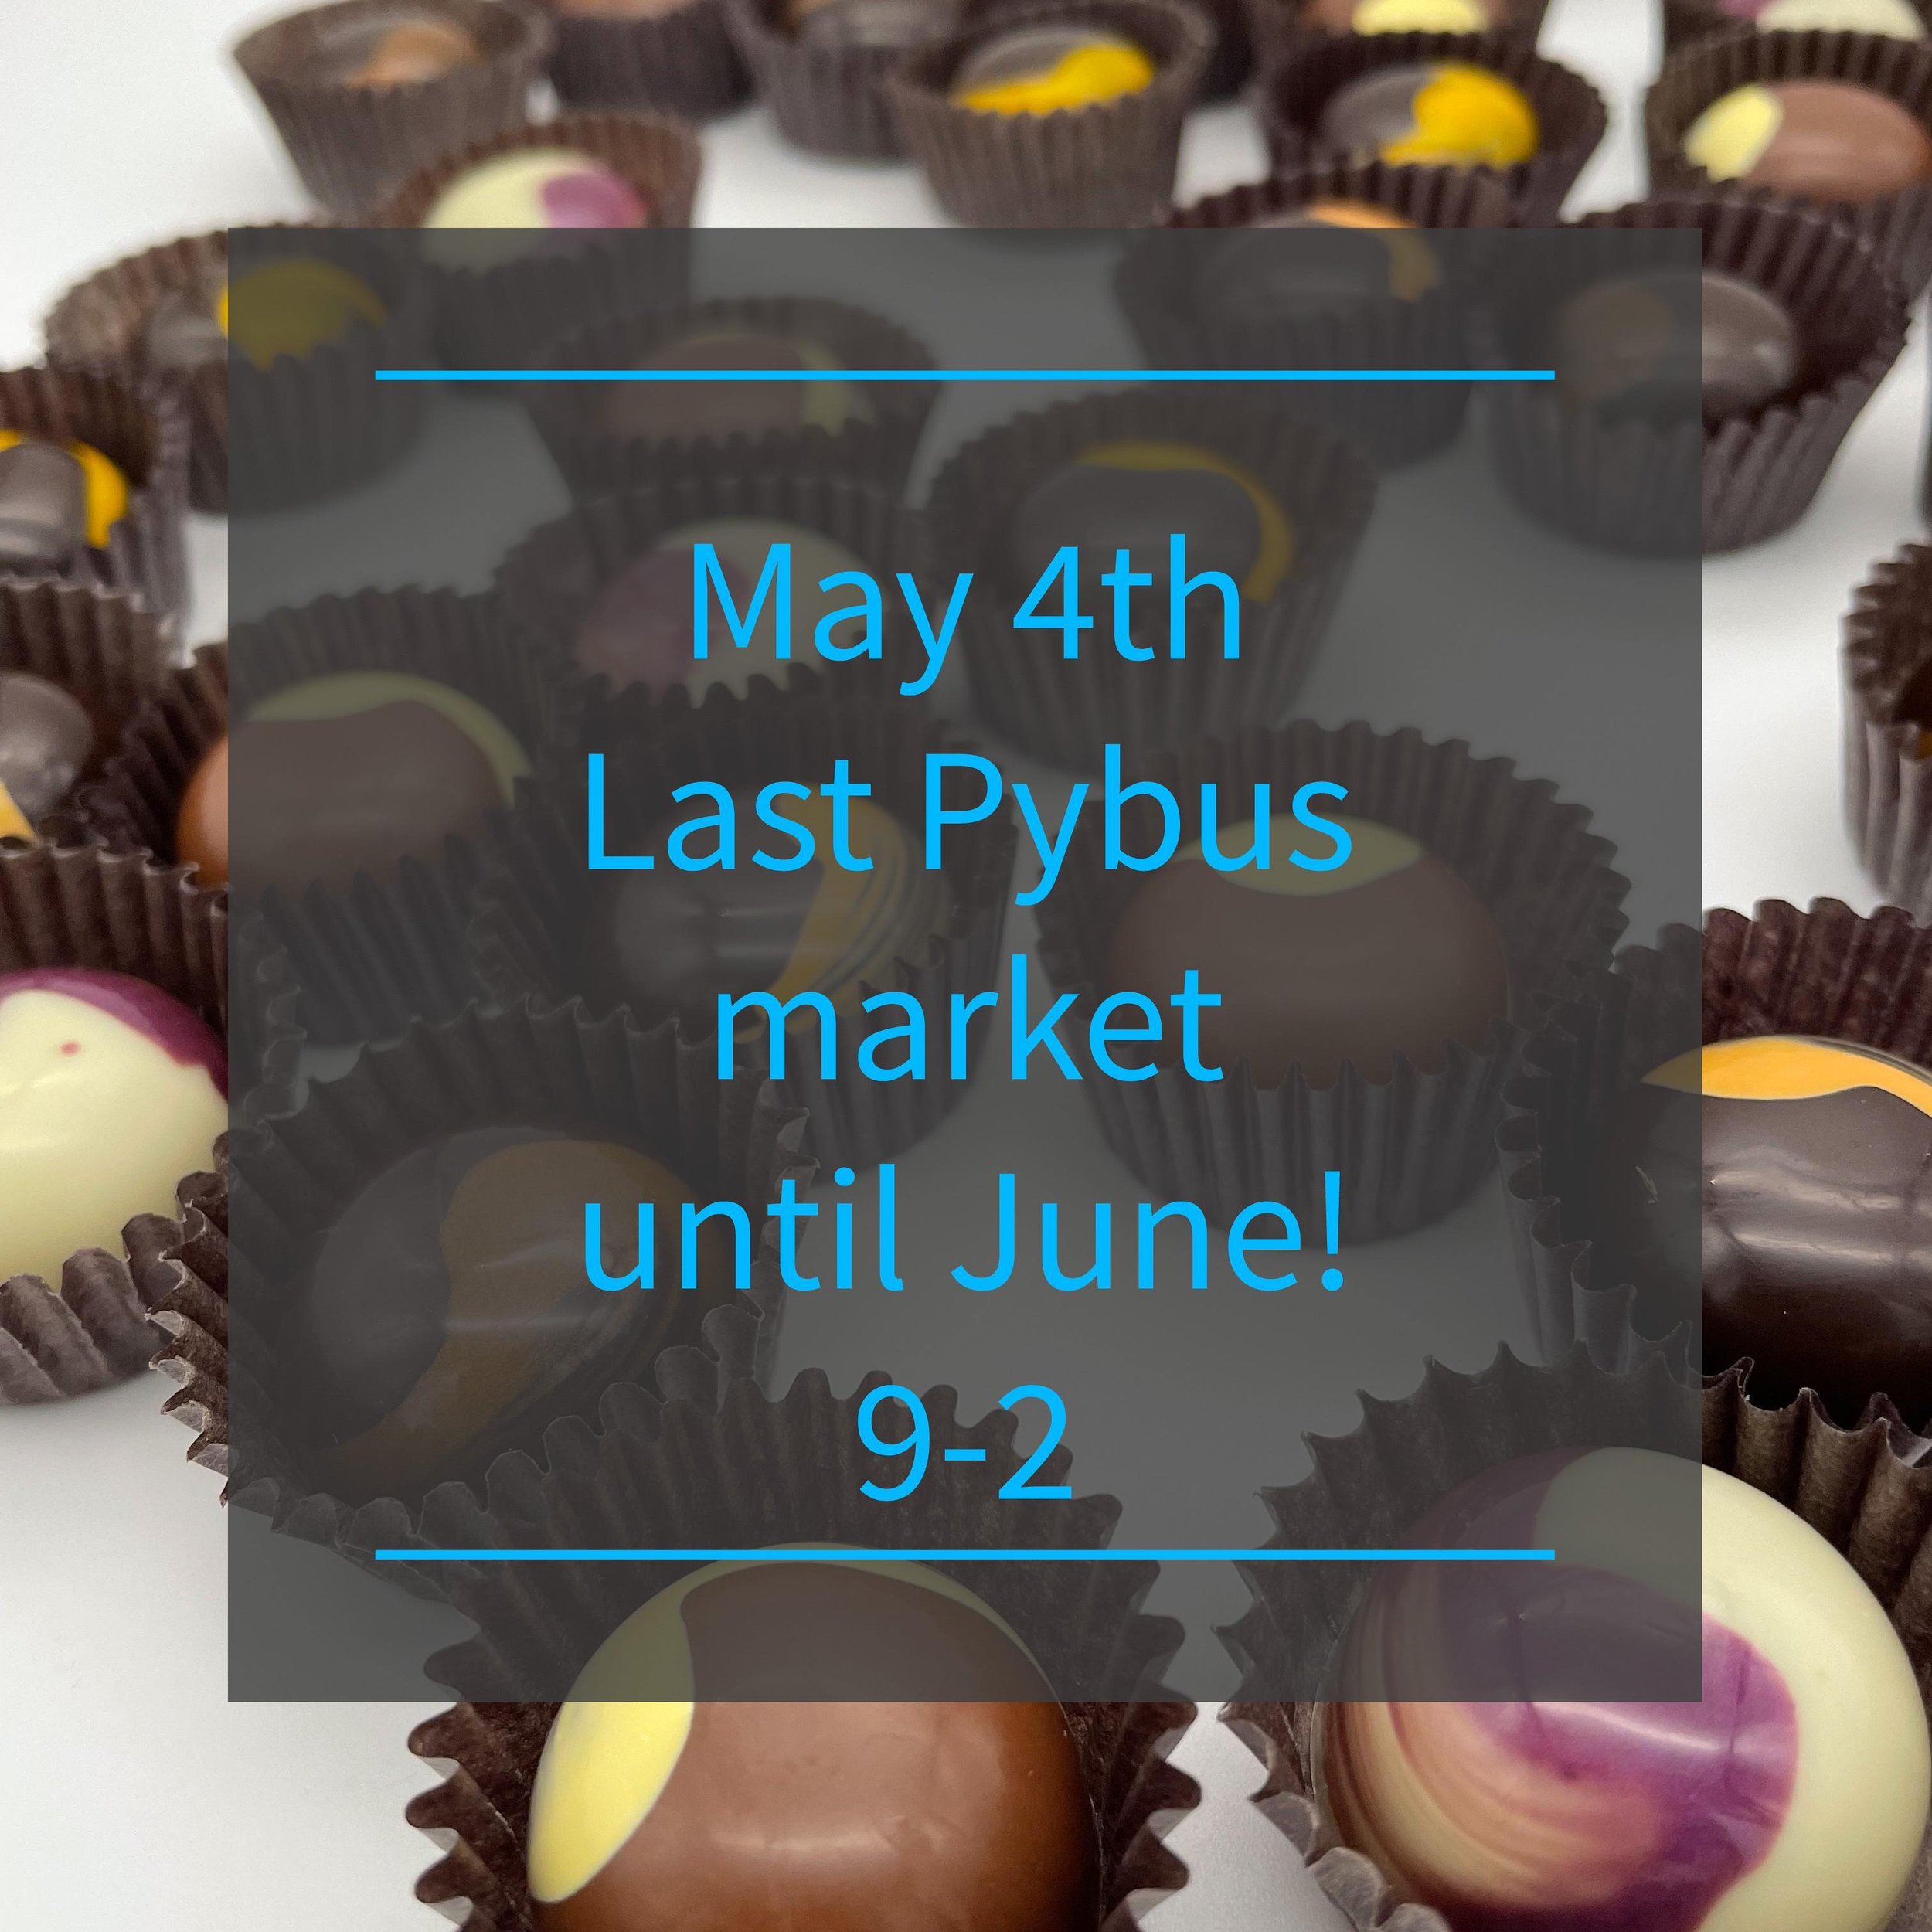 Tomorrow!!! Last @pybuspublicmarket I&rsquo;ll be at until June, so if you want your Mother&rsquo;s Day chocolates, and the last chance in person for the Spring Collection, come down and see me!!
&bull;
&bull;
#yetichocolates #pybusmarket #wenatchee 